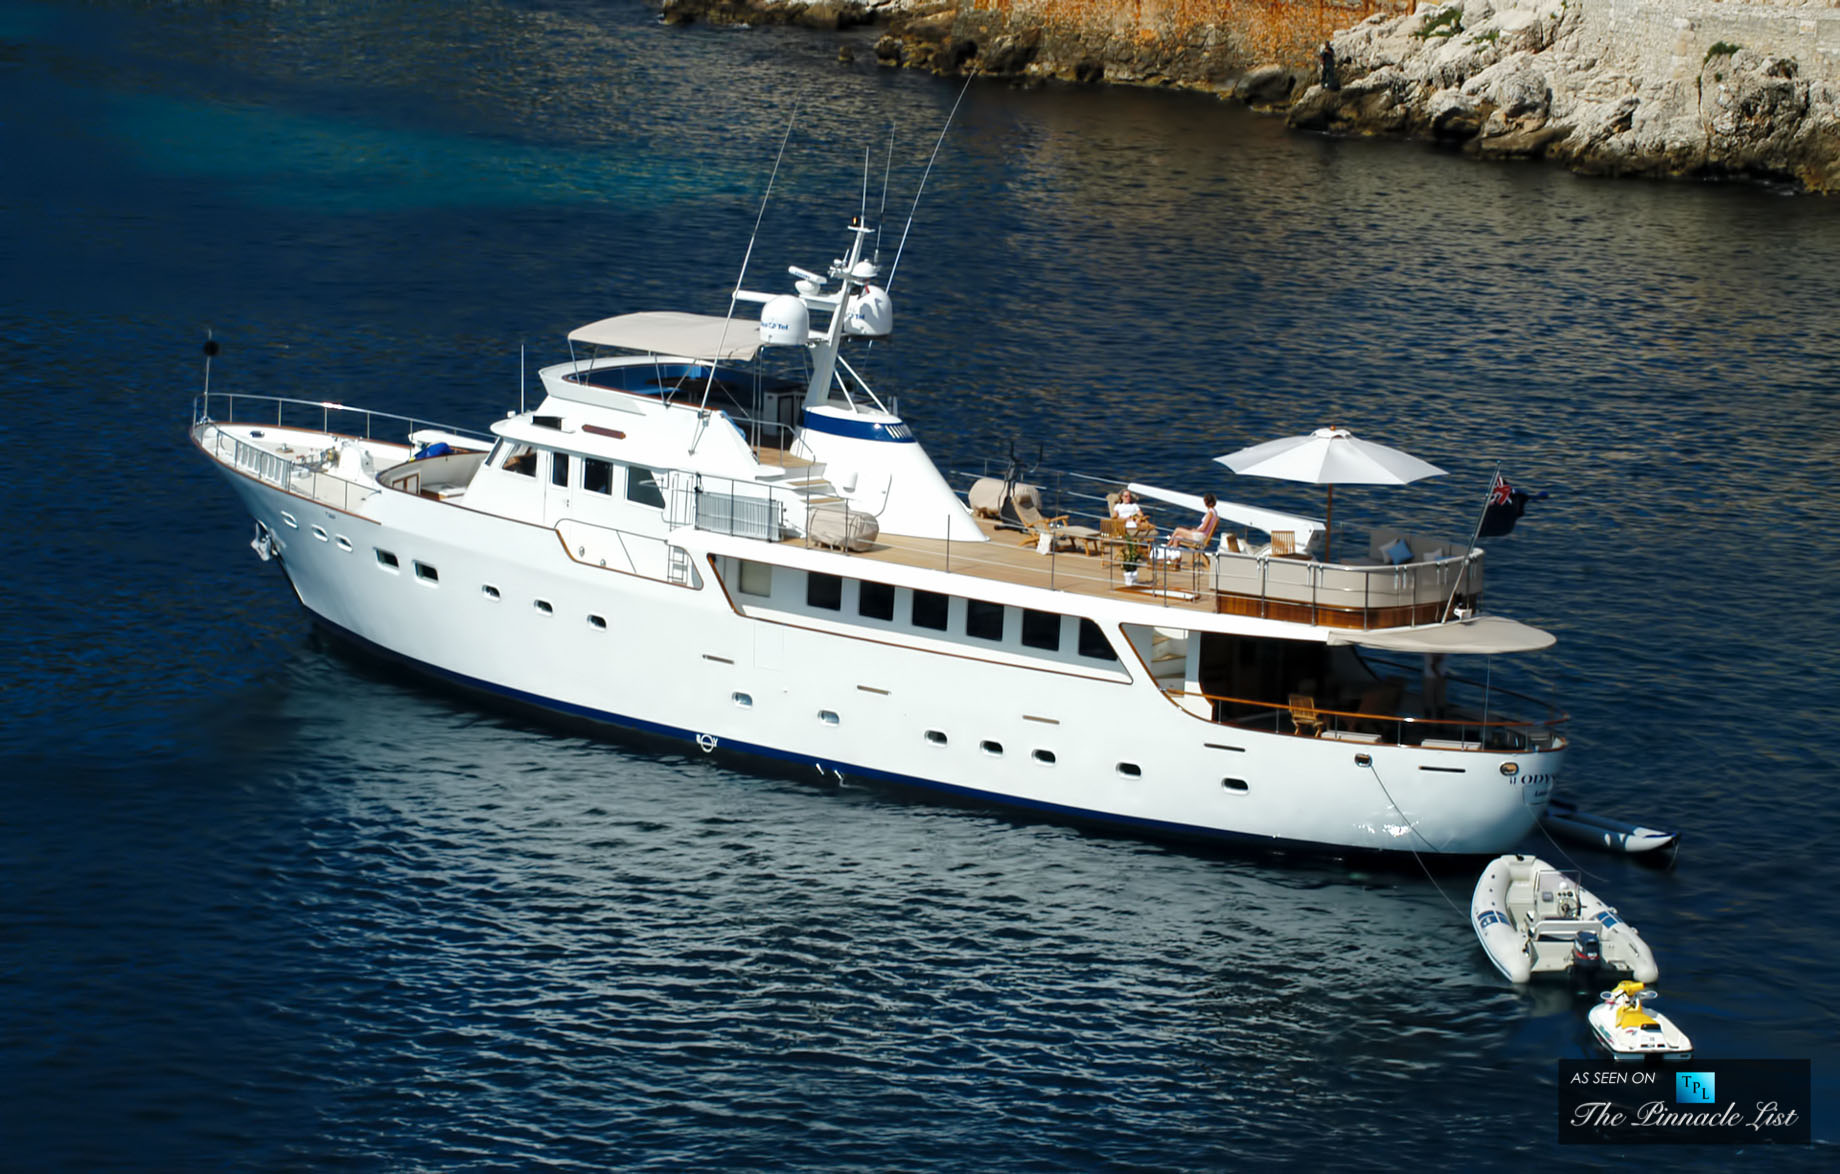 Il Odissey - Four Classic Superyachts Offering Timeless Elegance and Modern Comfort